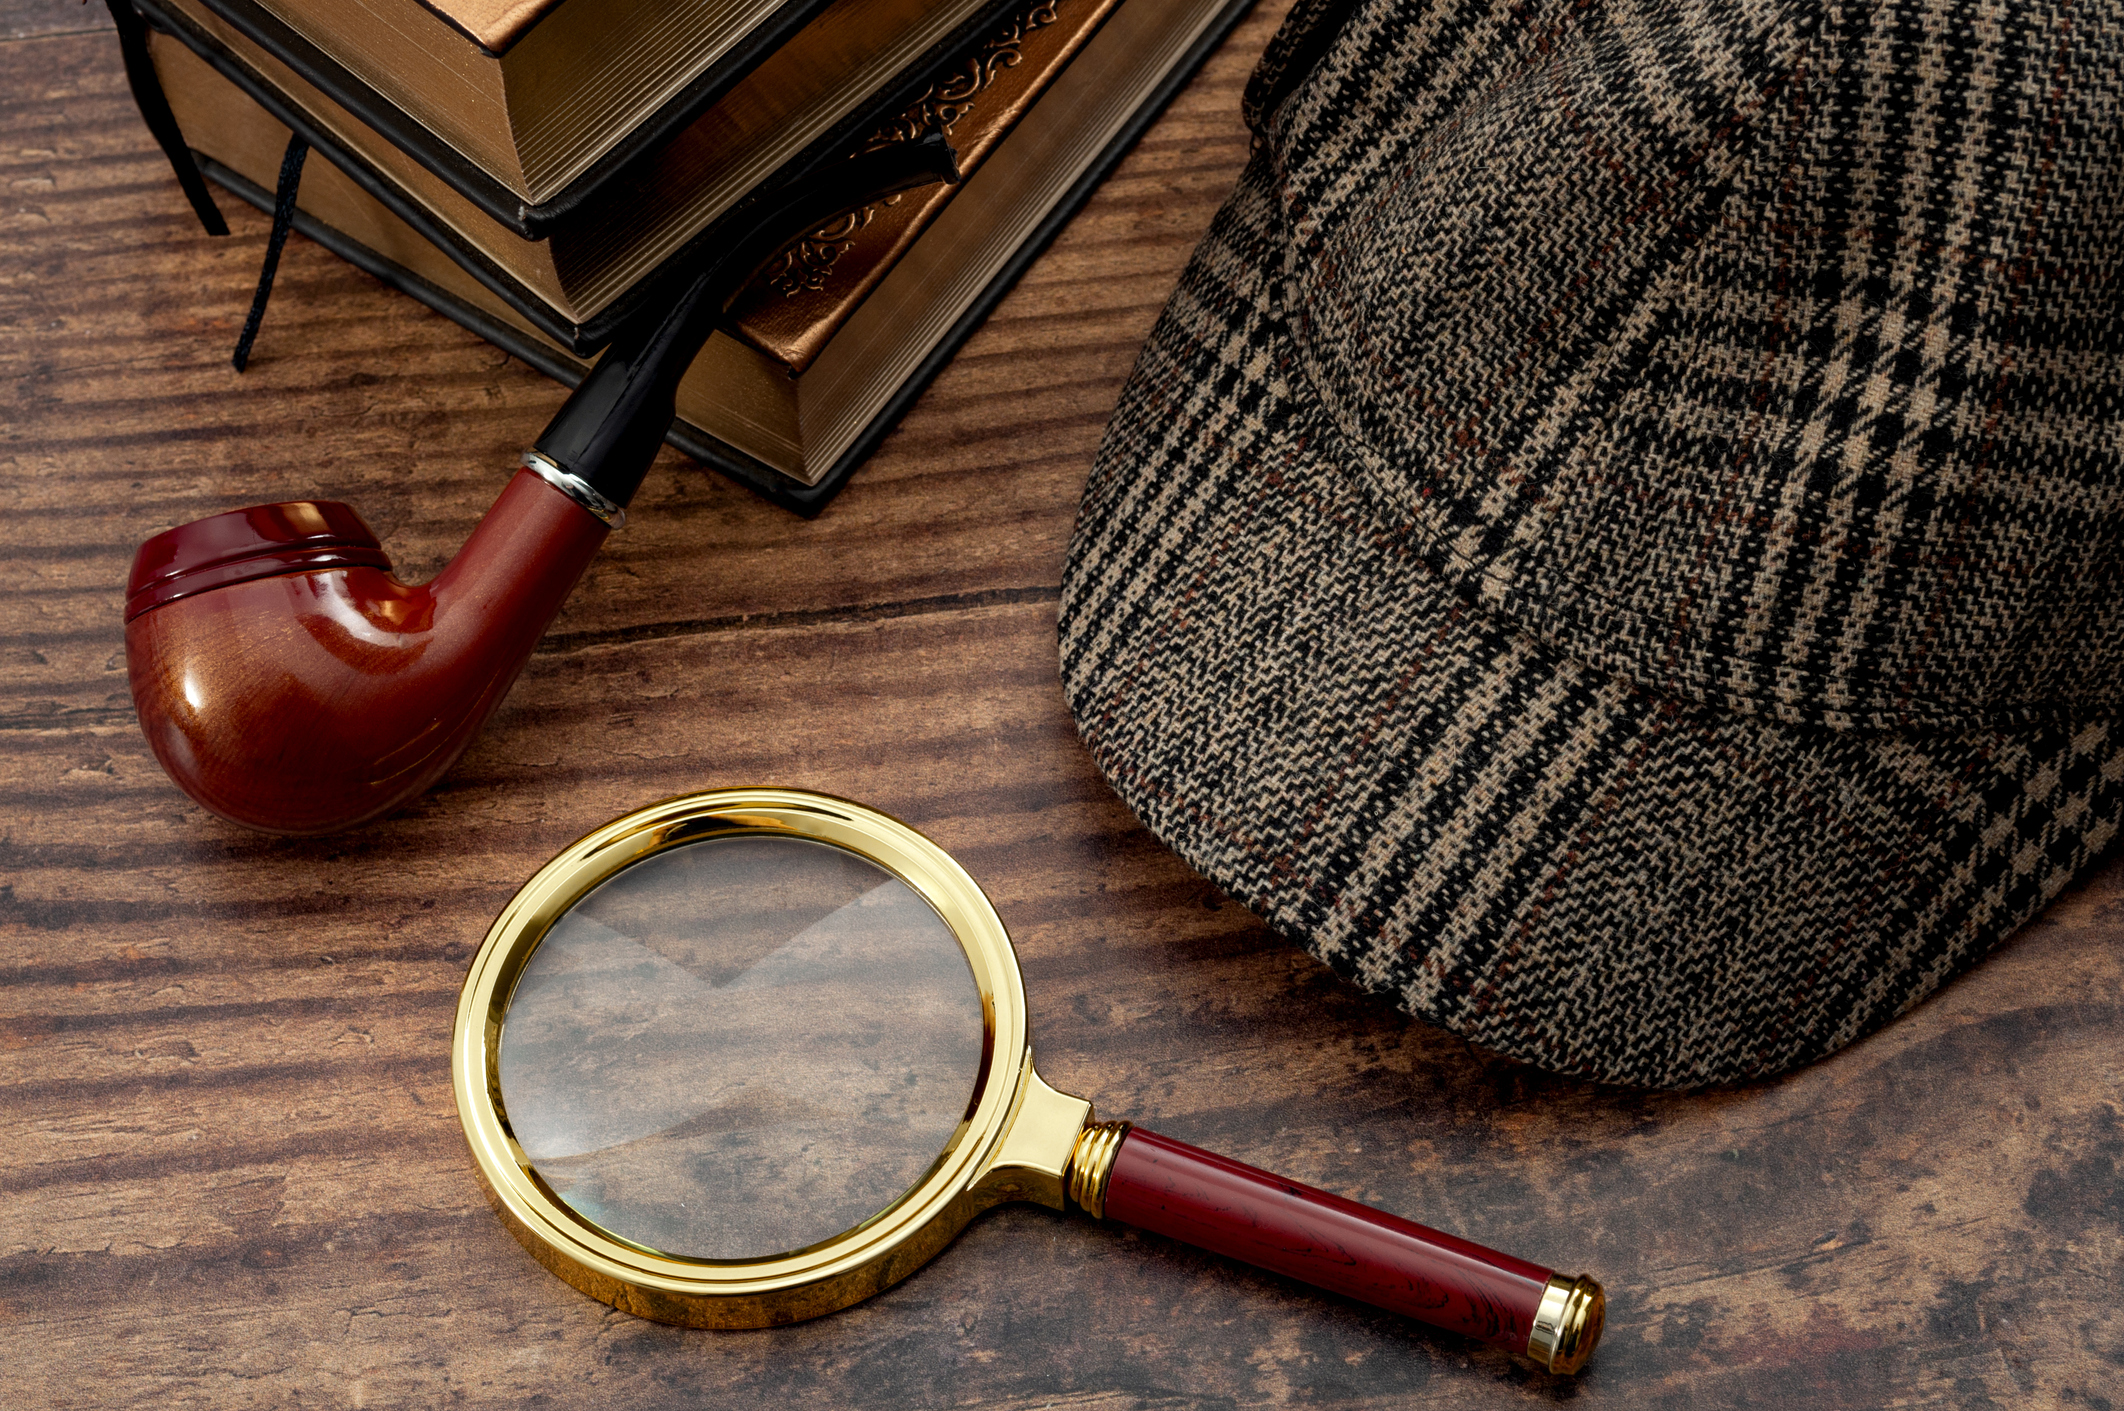 If mystery novels are your thing, then direct your magnifying glass toward the Floyd Memorial Library book club